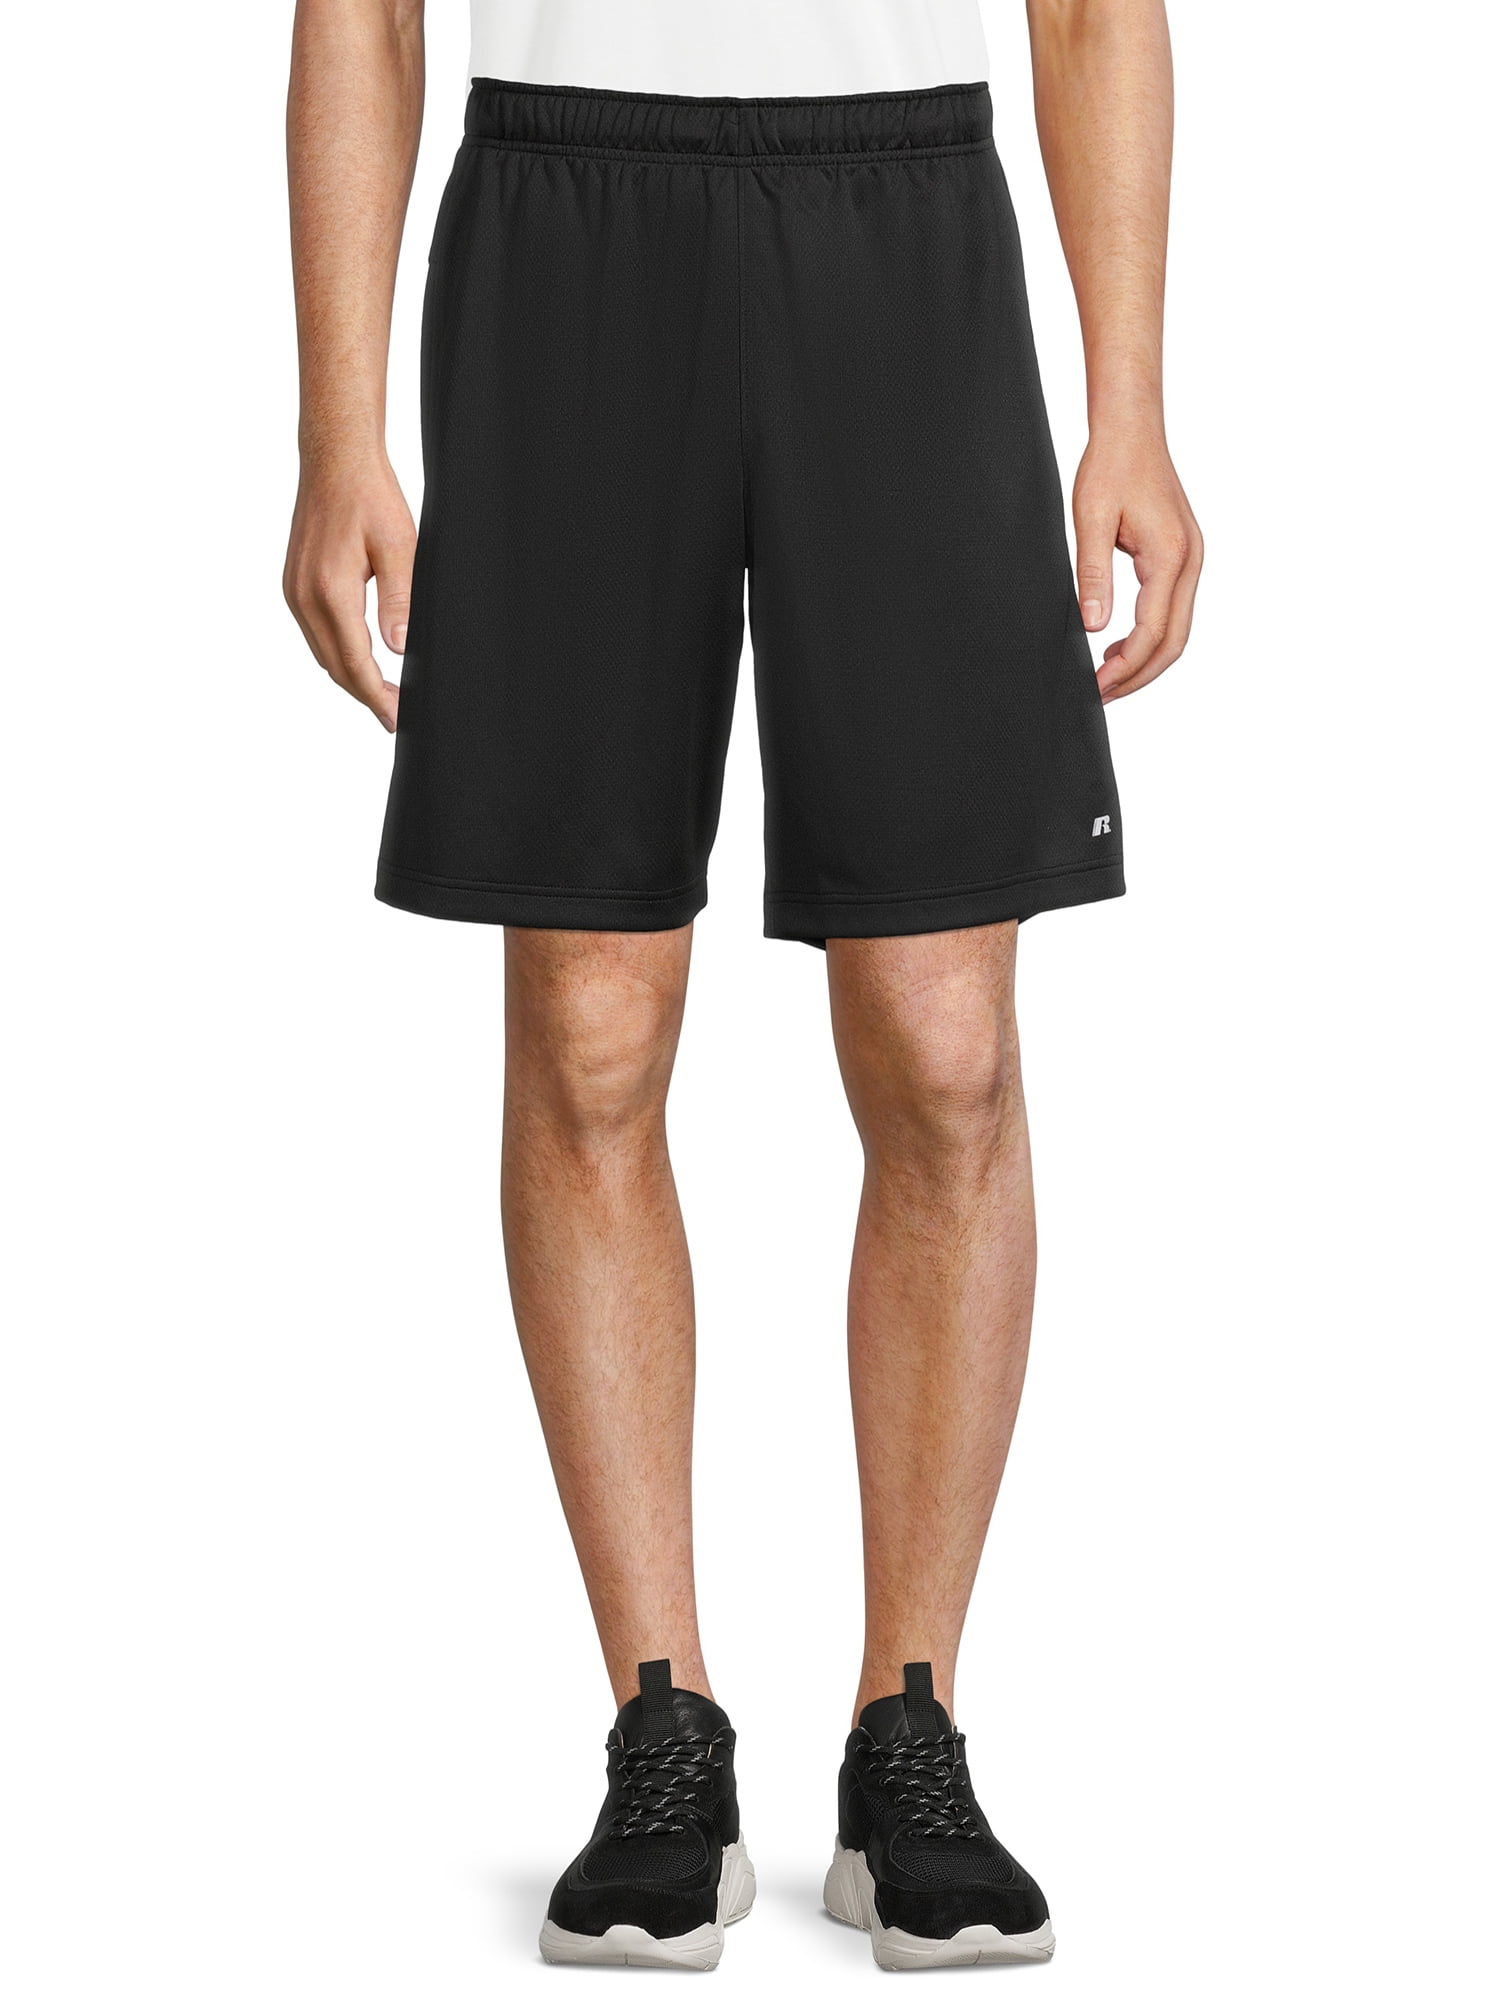 Russell Men's Core Shorts